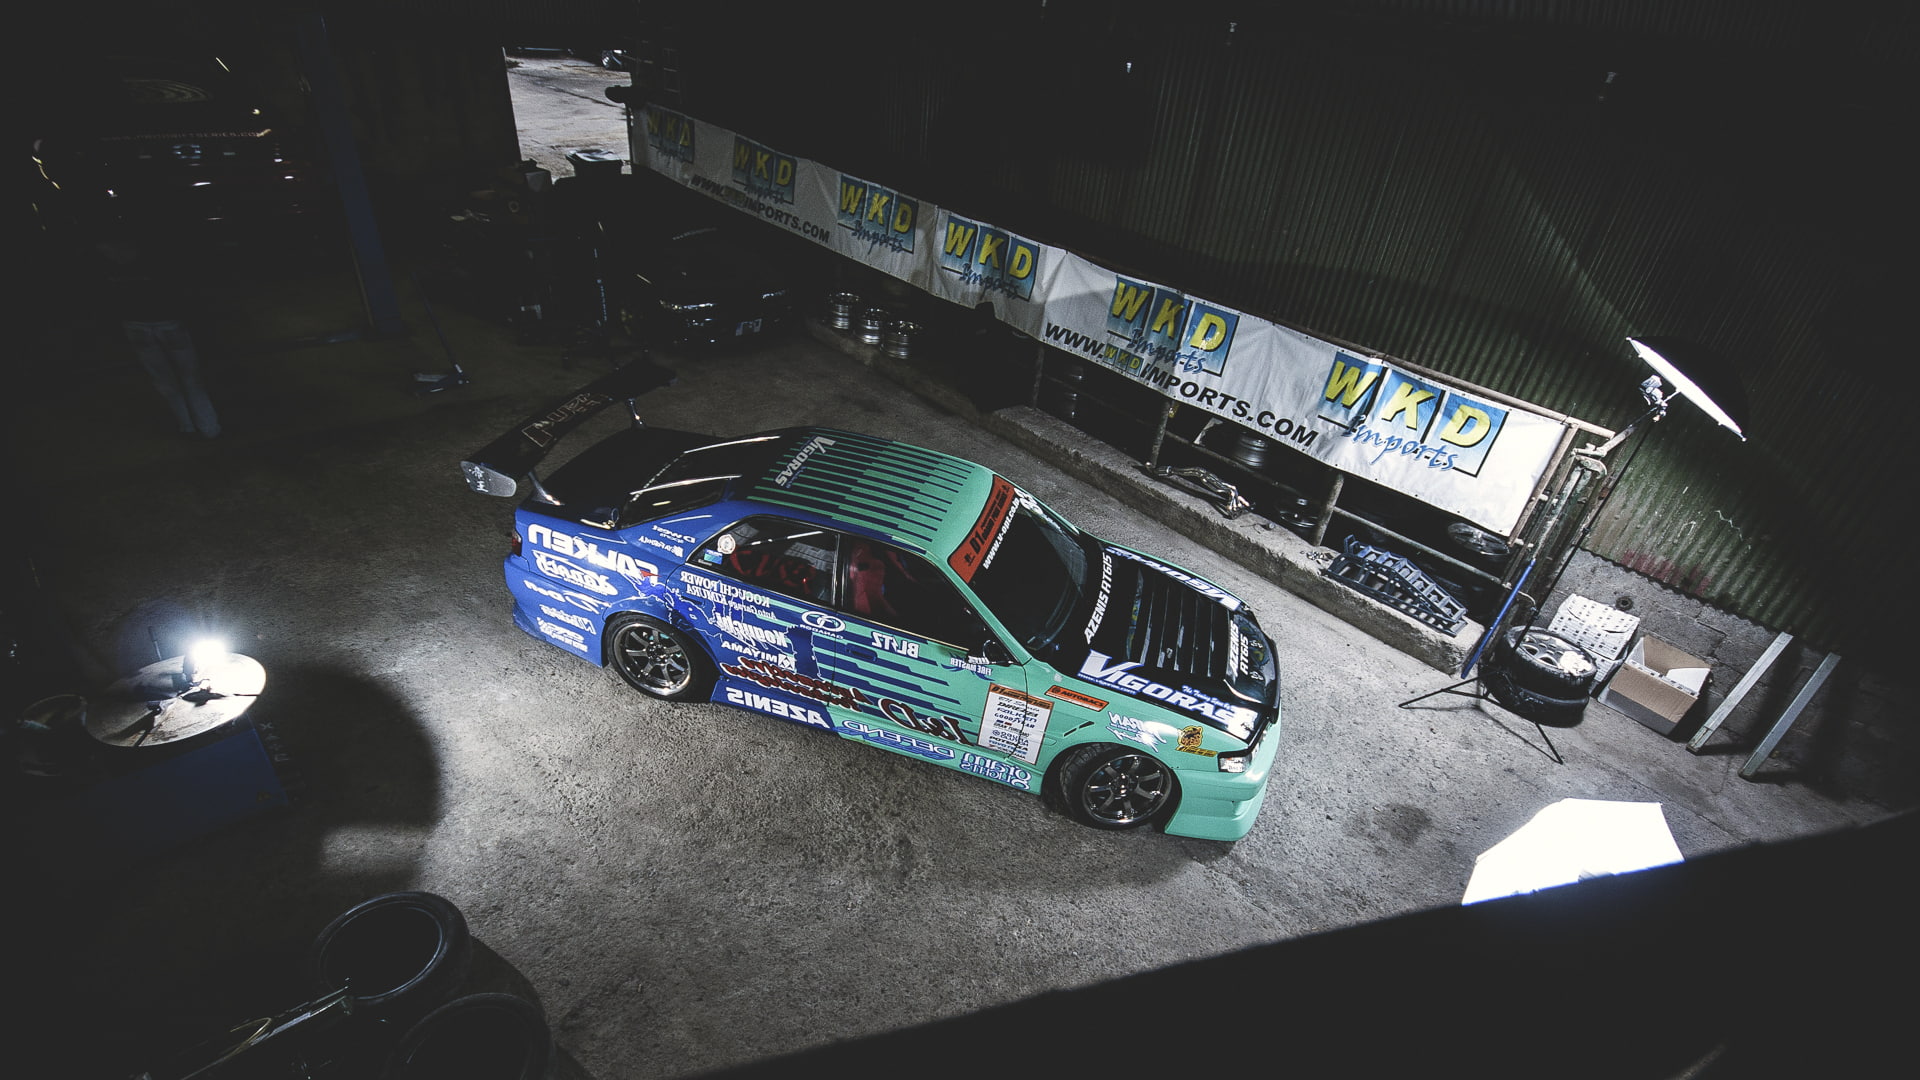 green and blue rally car, garage, drift, Toyota, chaser, mode of transportation